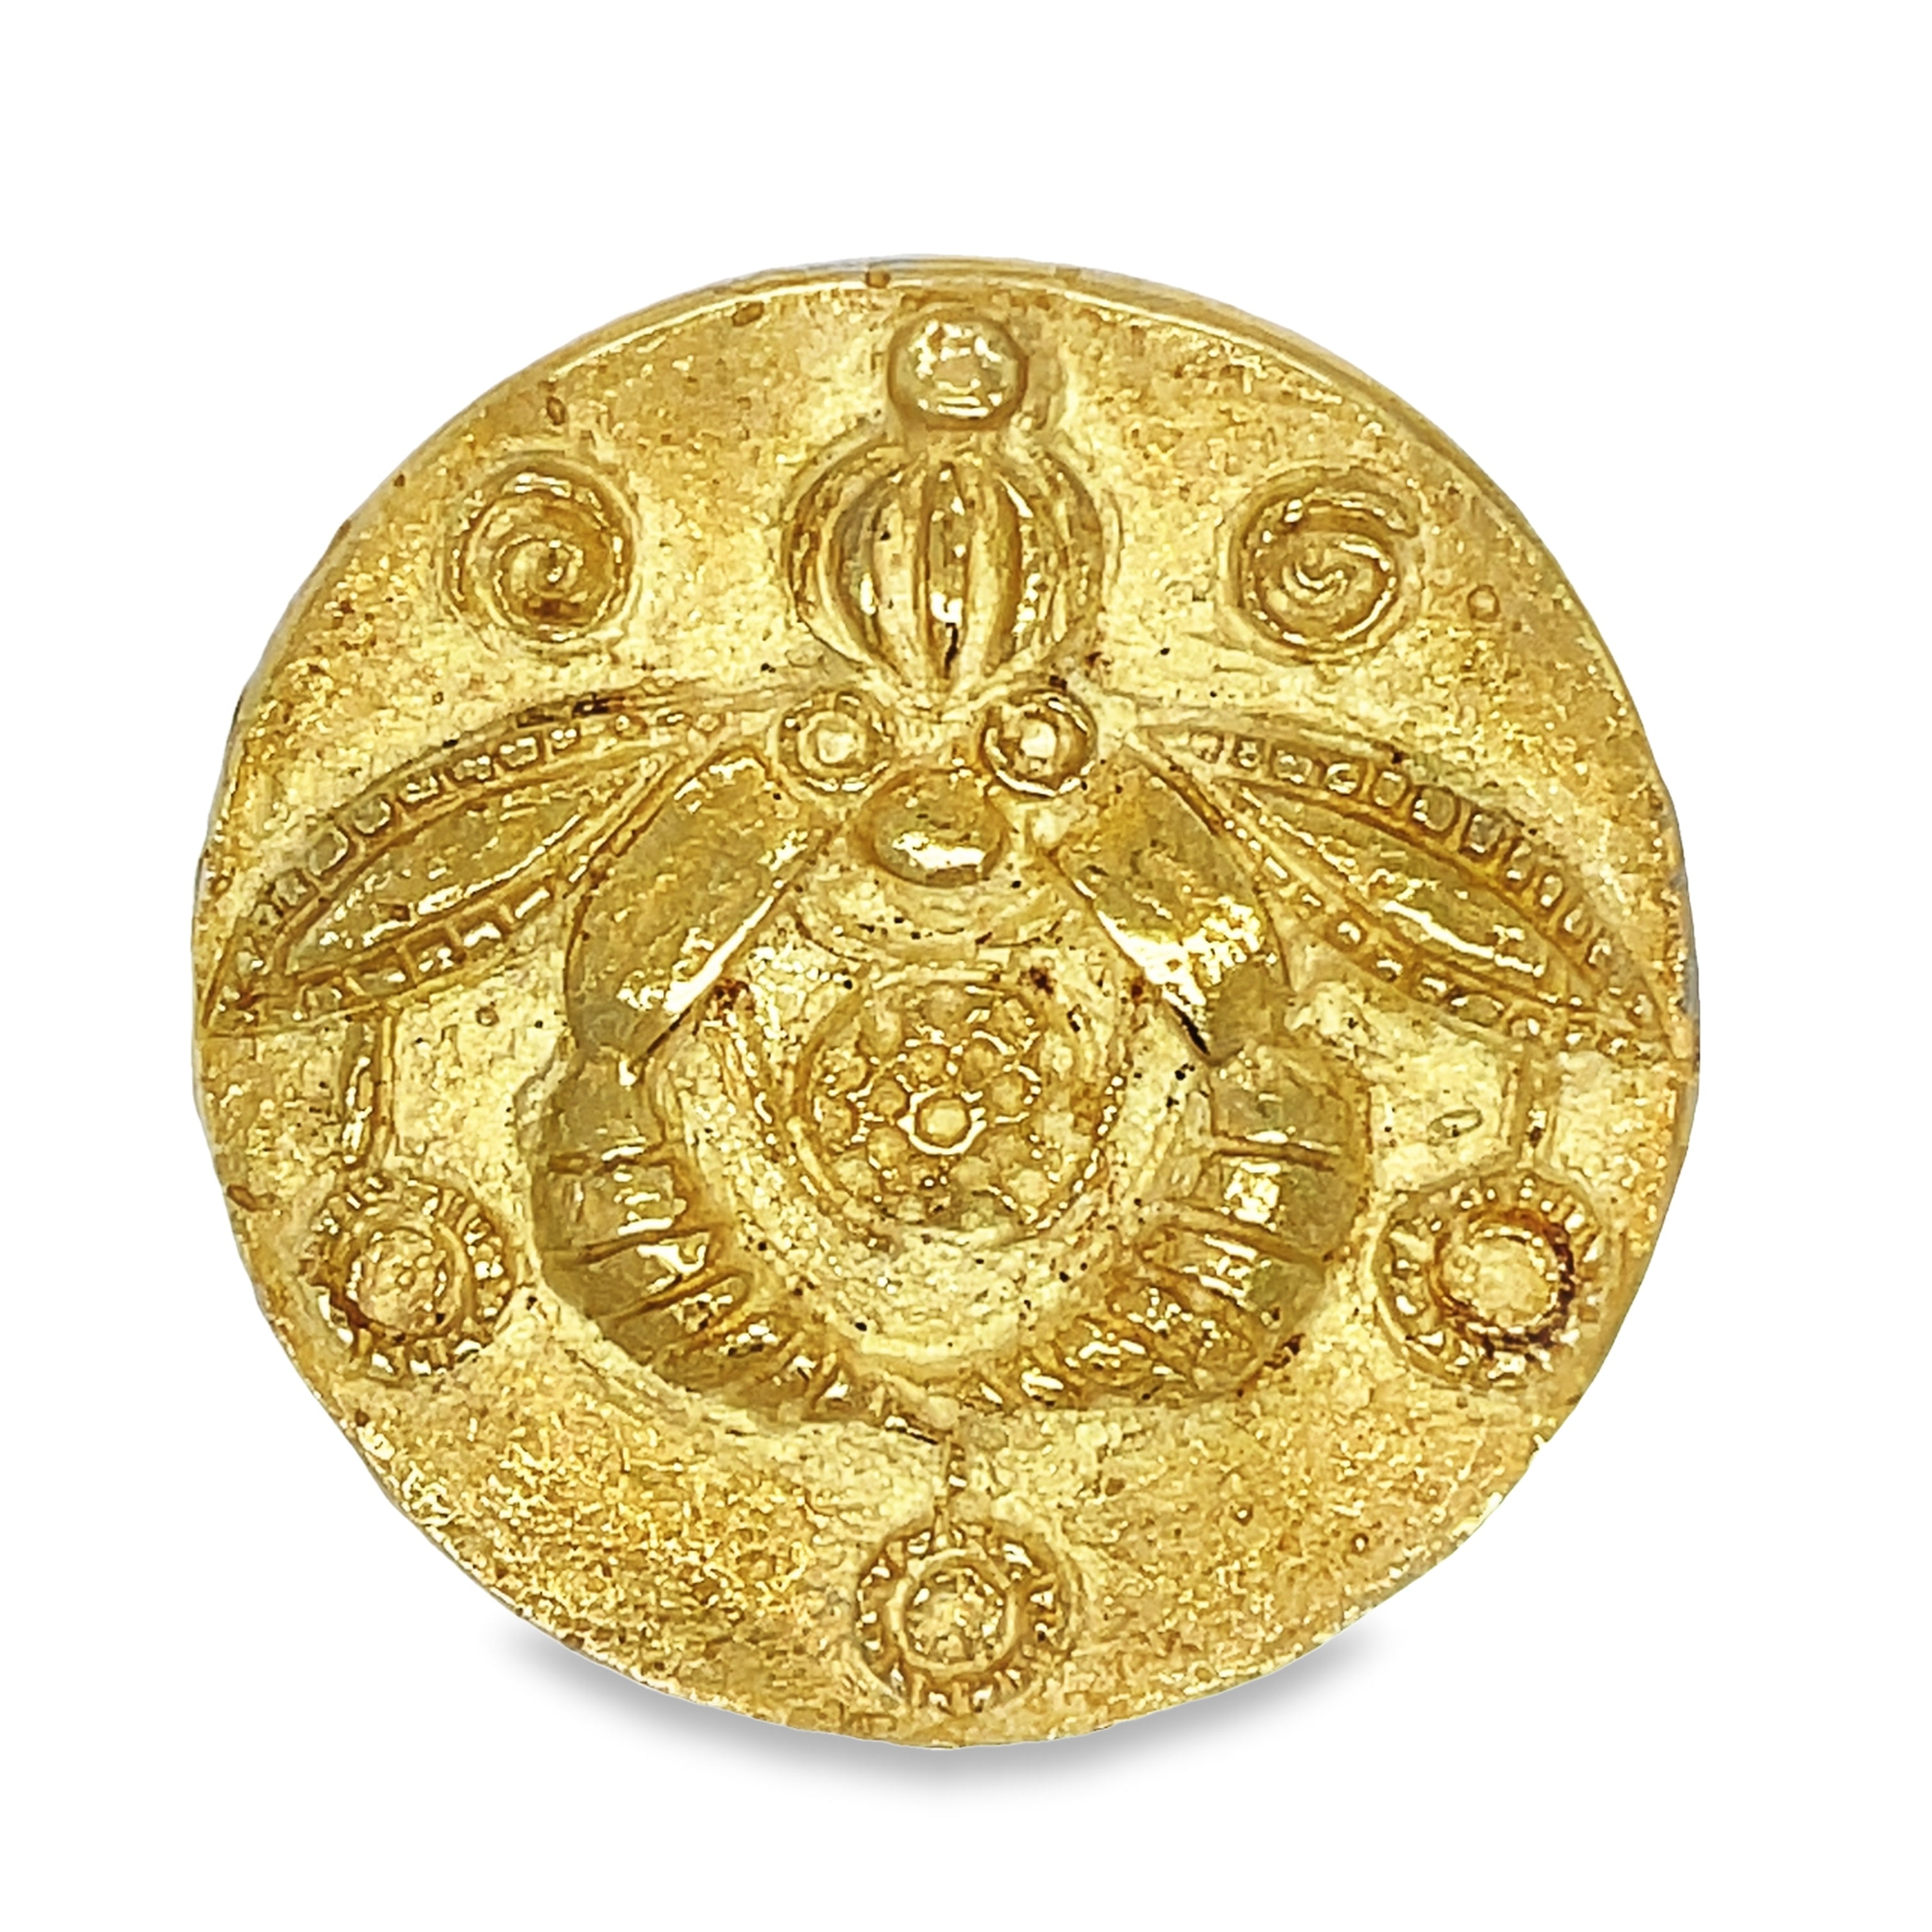 Enhance your outfit with the elegance of our Queen Bee Greek Design Yellow Gold Brooch. Made from 18k solid yellow gold, this round 1.5" pin boasts a beautiful matte finish and intricate carved design. Perfect for any occasion, embrace the queen bee within!